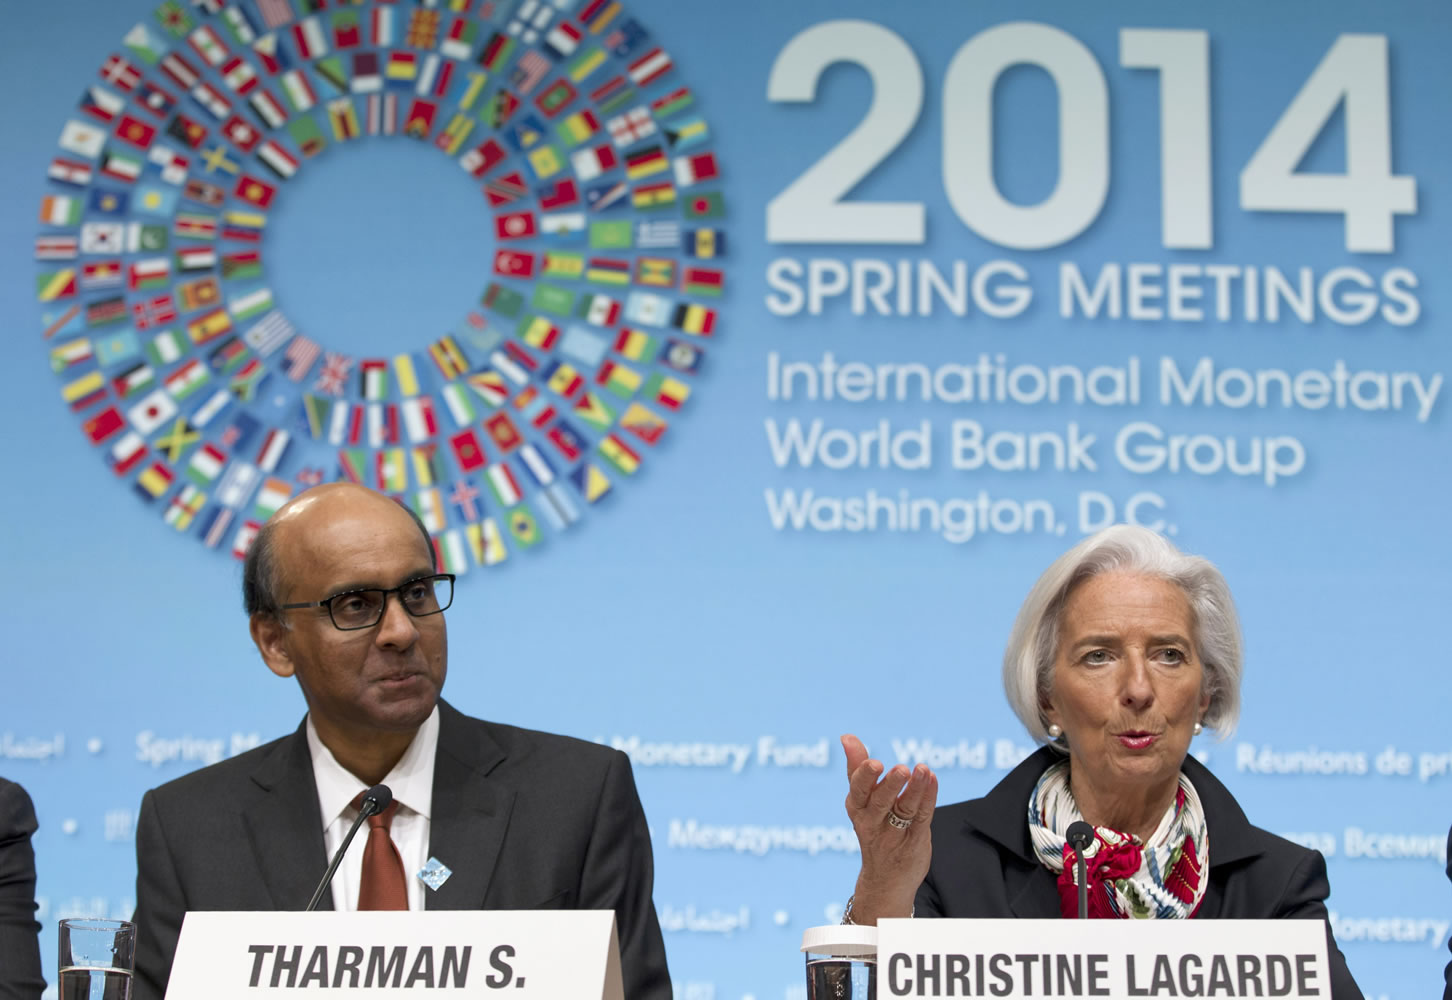 International Monetary Fund Managing Director Christine Lagarde, accompanied by  IMFC Chair and Singapore Finance Minister Tharman Shanmugaratnam, speaks during a news conference Saturday at World Bank Group-International Monetary Fund Spring Meetings in Washington.